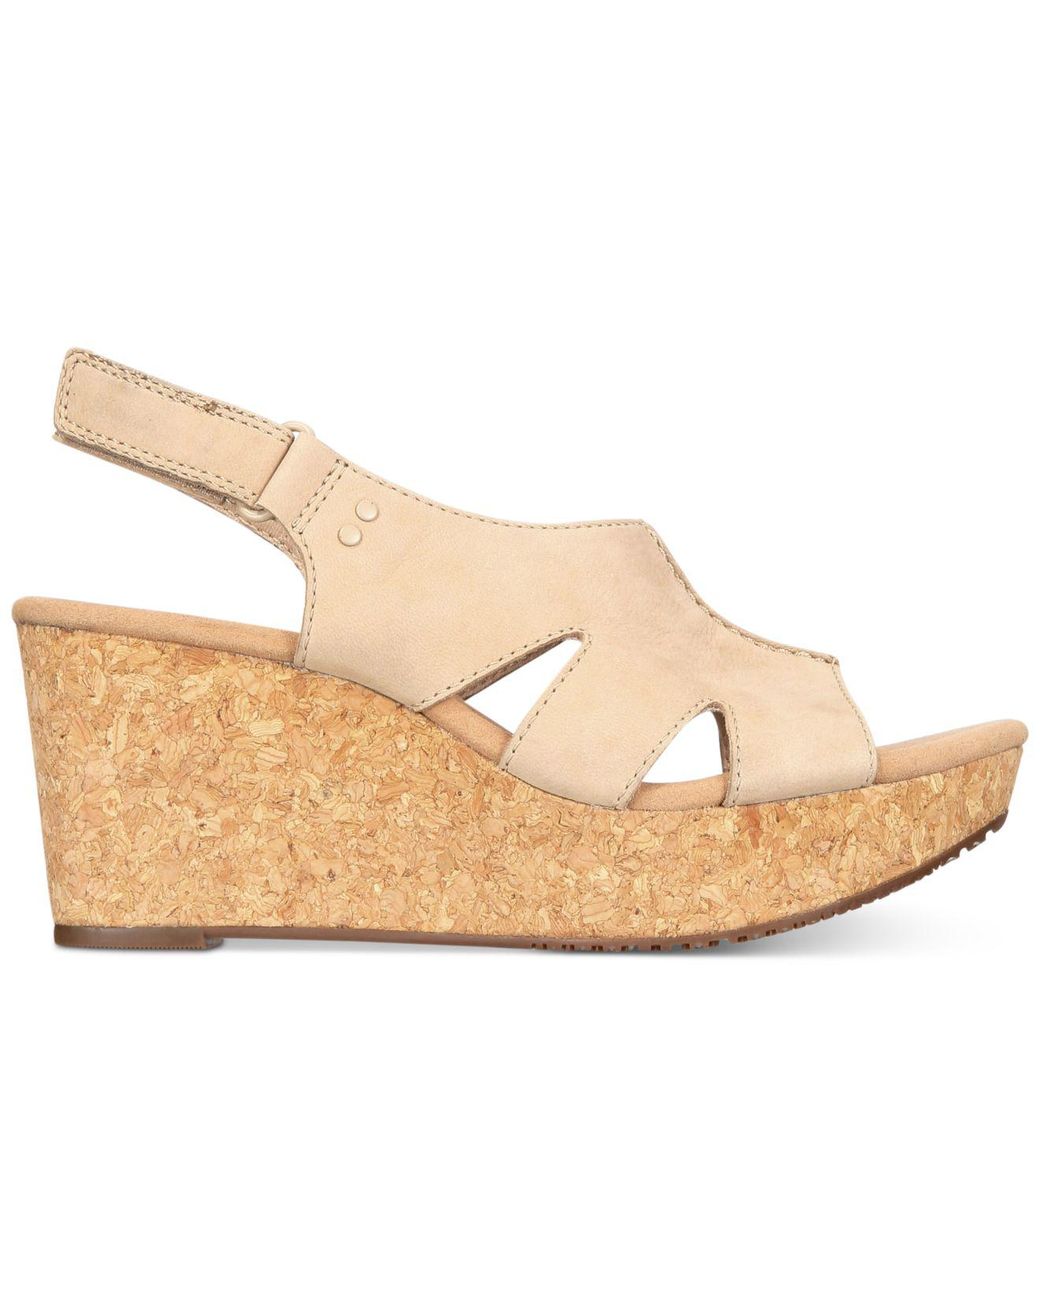 Clarks Leather Women's Annadel Bari Wedge Sandals in Sand Nubuck (Natural)  | Lyst